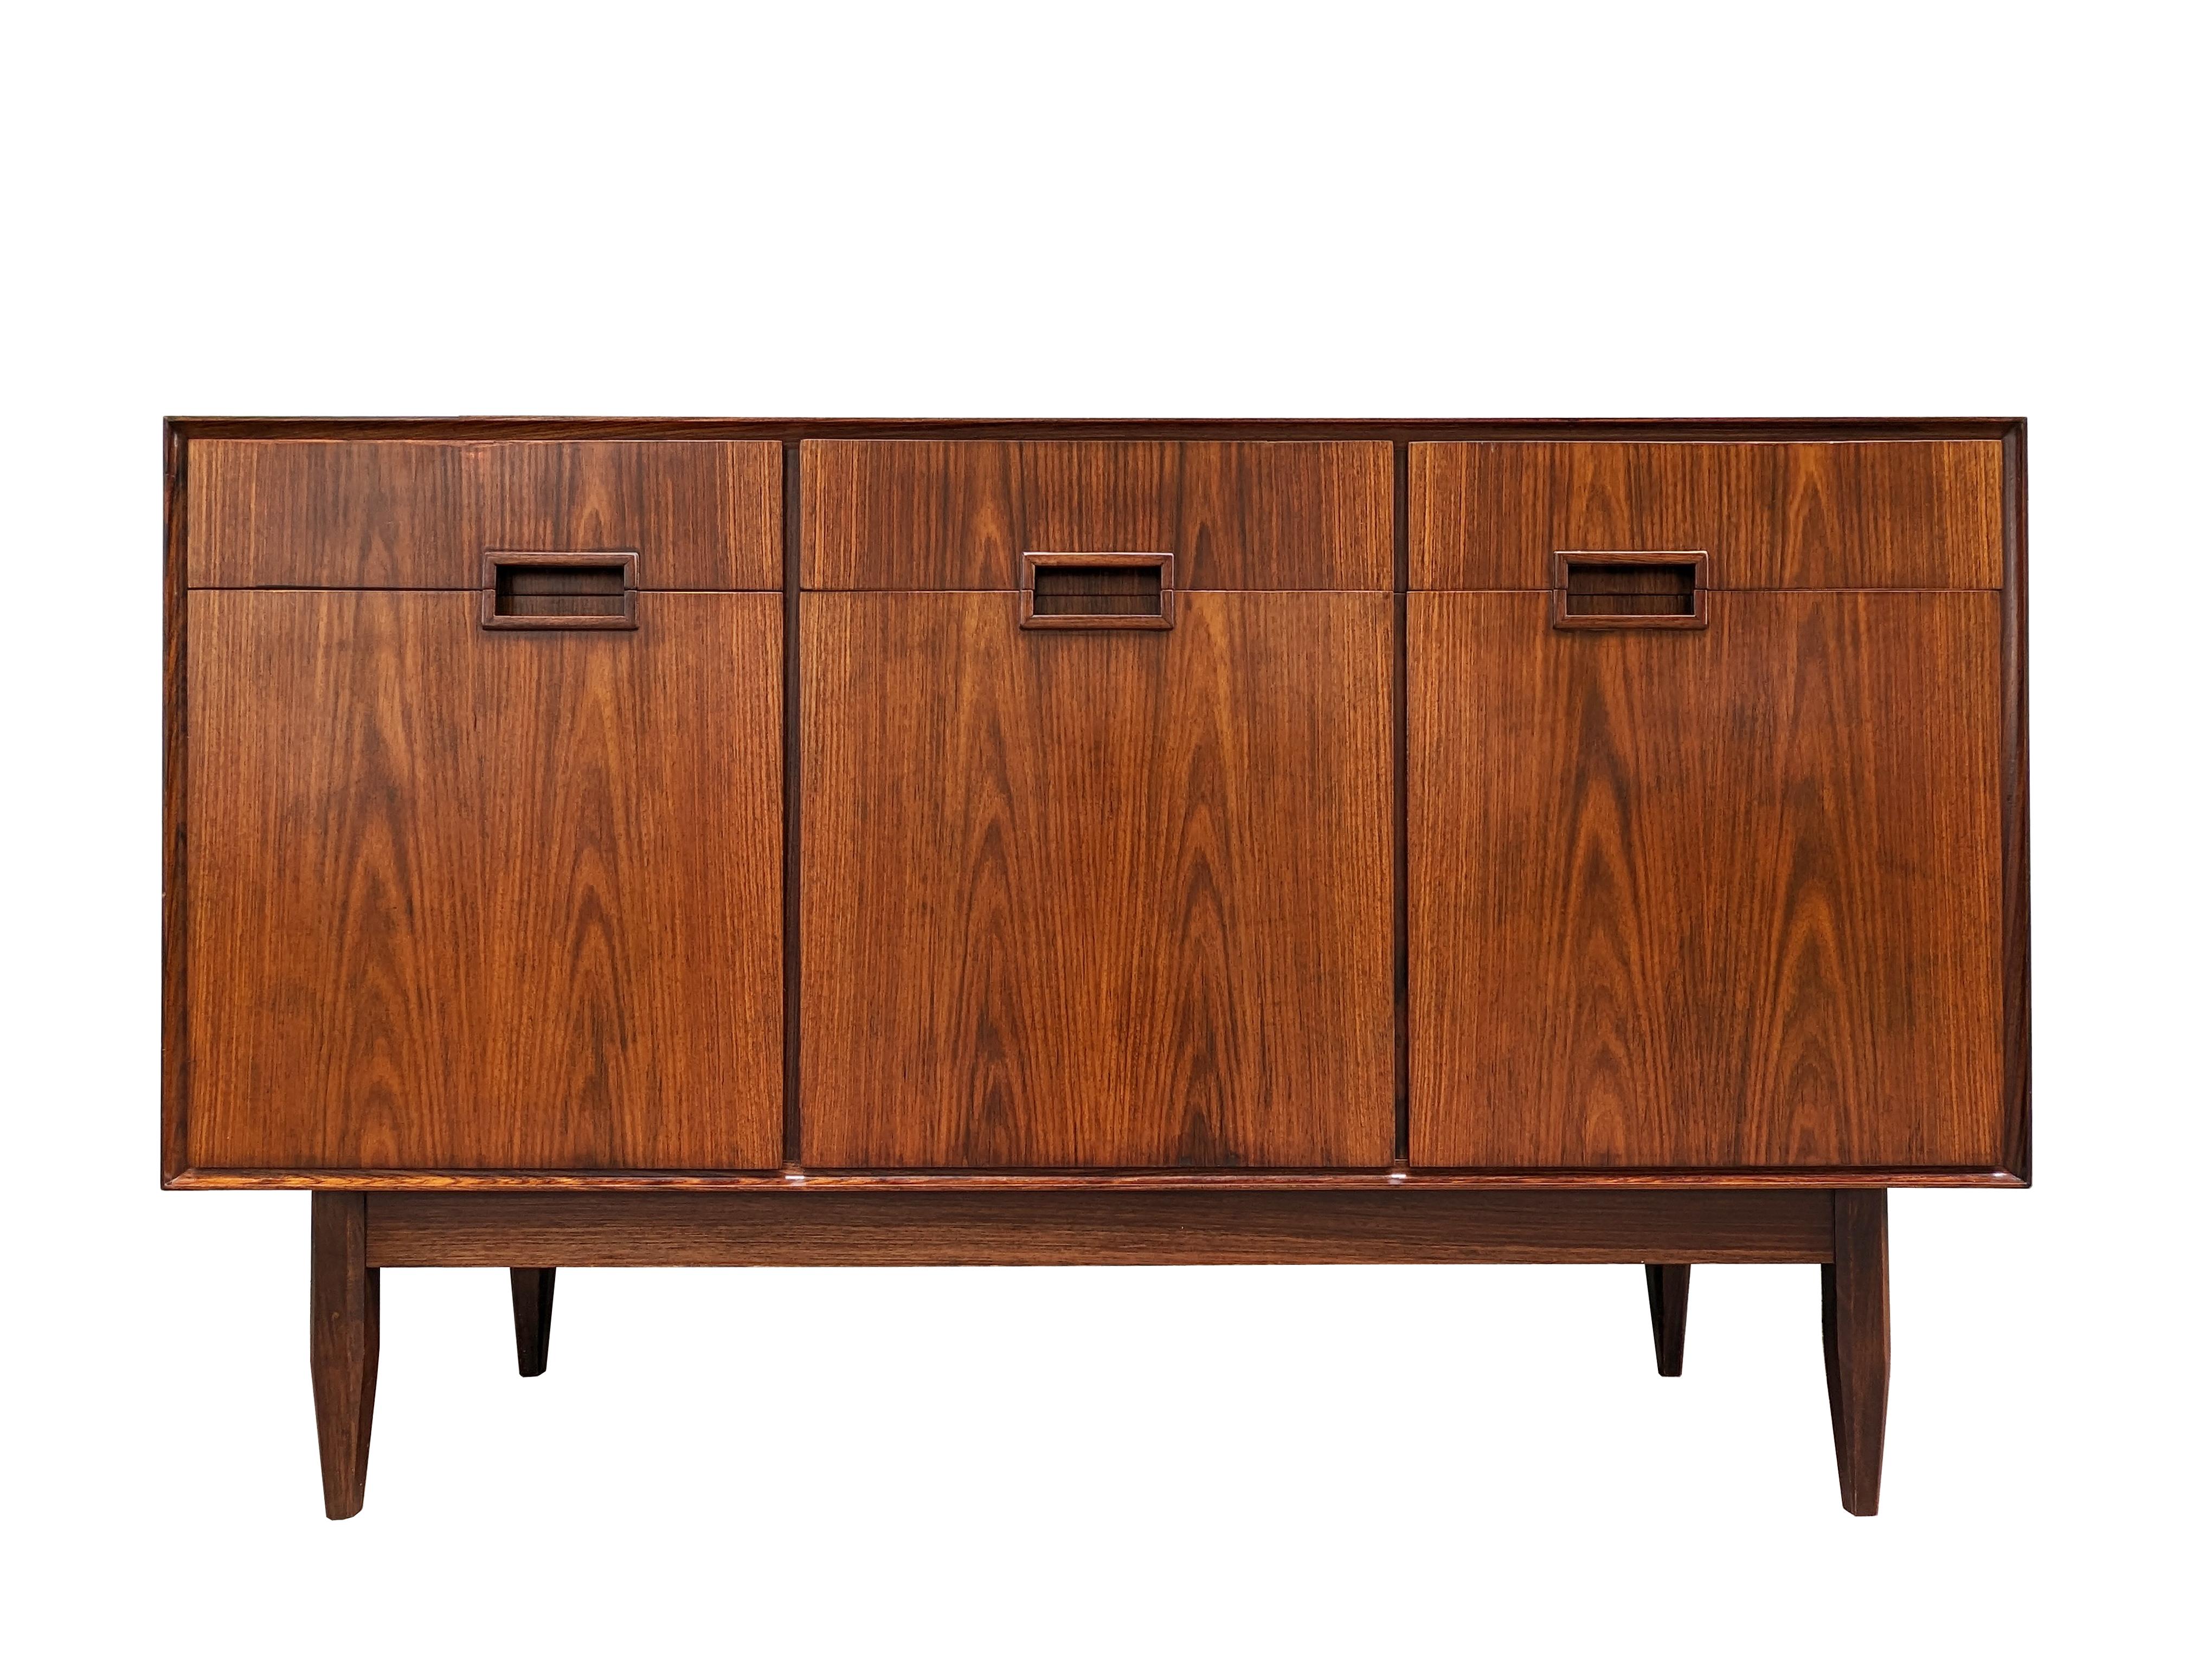 Italian Wooden Mid Century Modern Sideboards in the style of Dassi, set of 2 For Sale 9